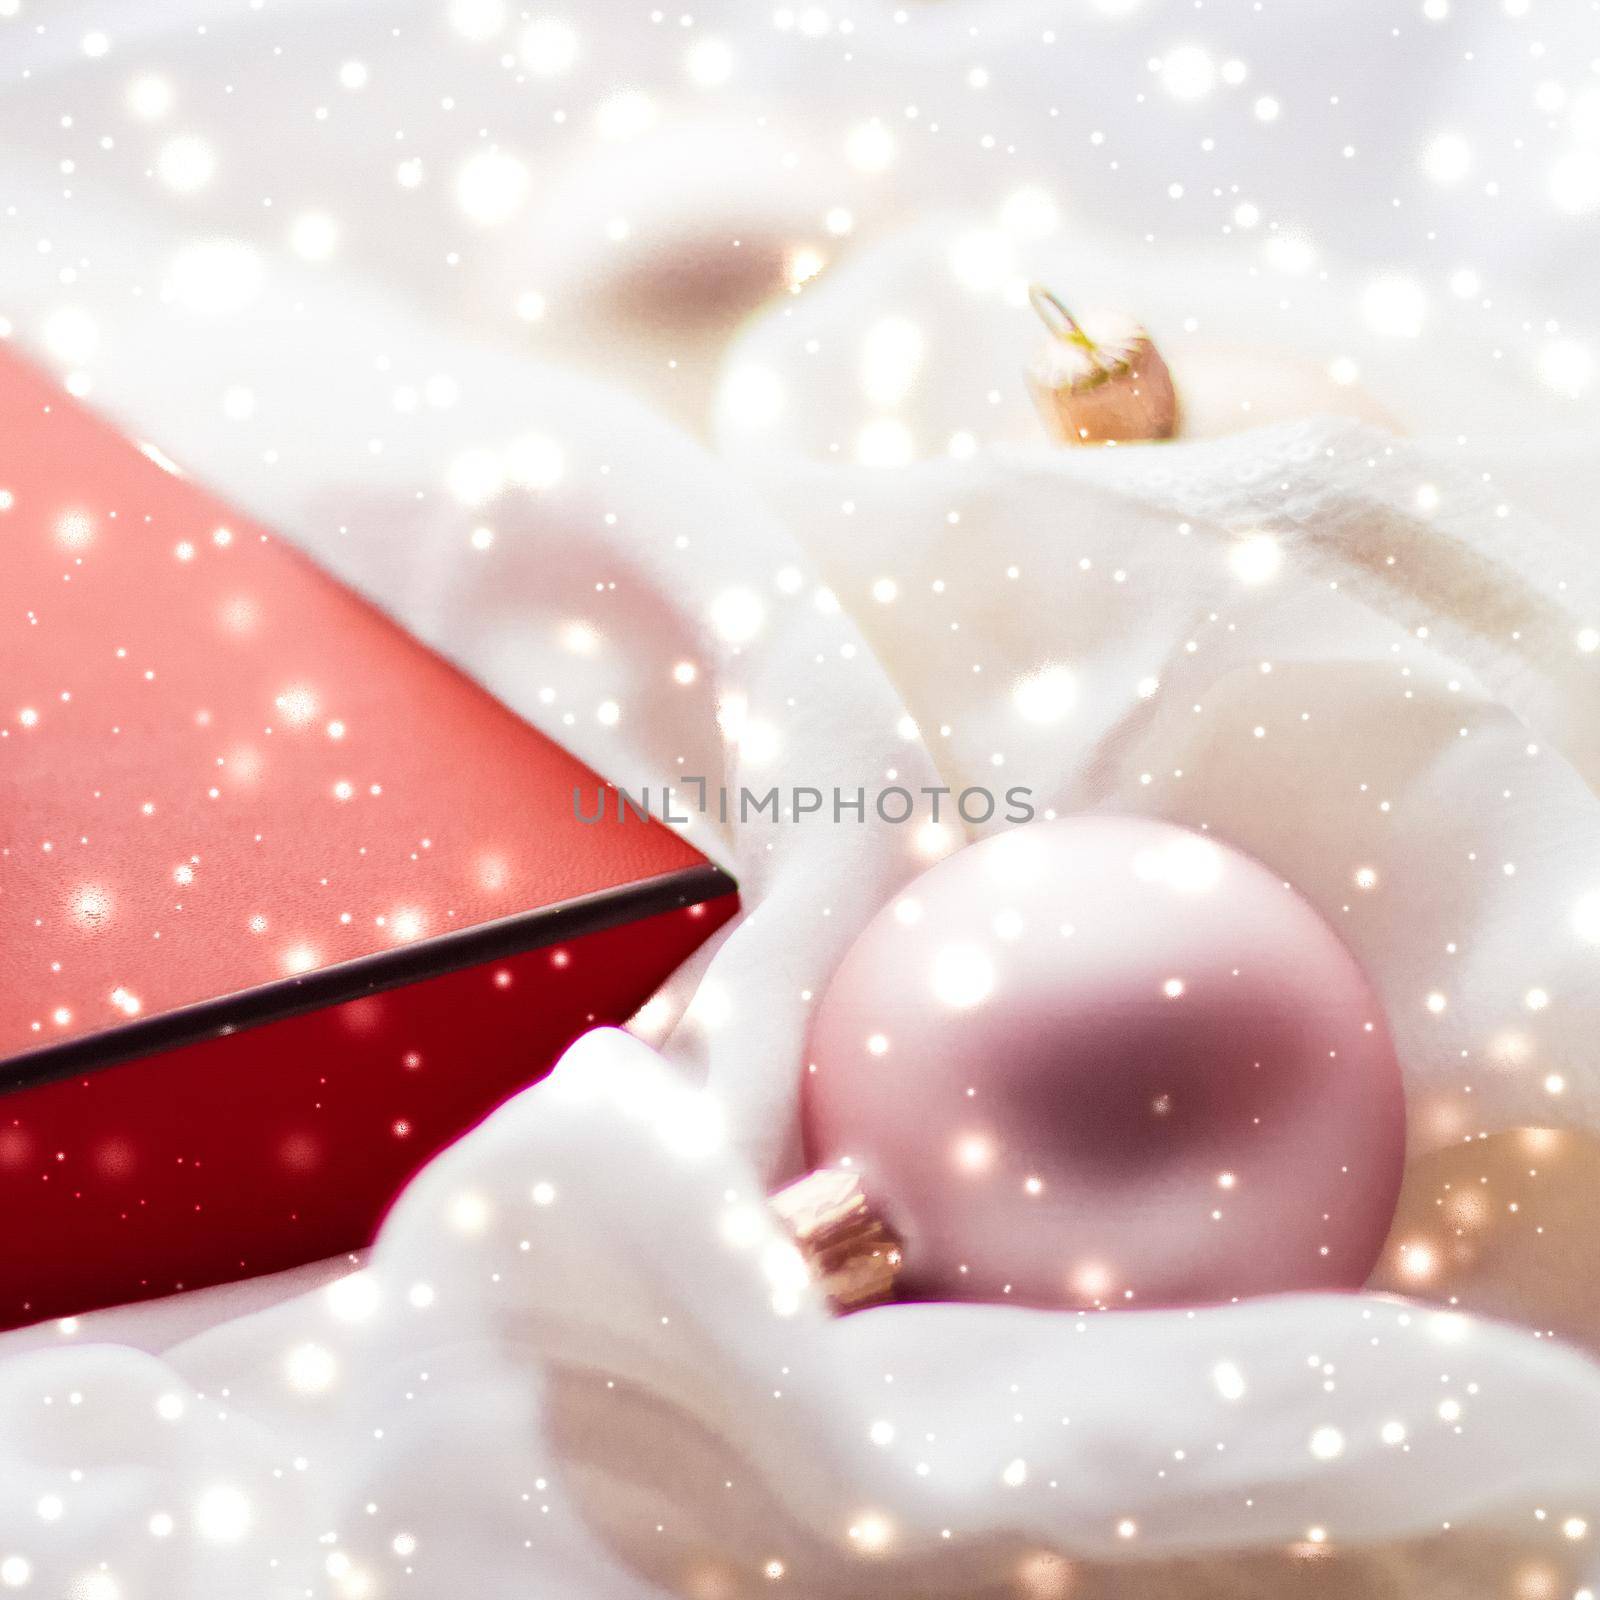 Holidays branding, glamour and decoration concept - Christmas magic holiday background, festive baubles, red vintage gift box and golden glitter as winter season present for luxury brand design